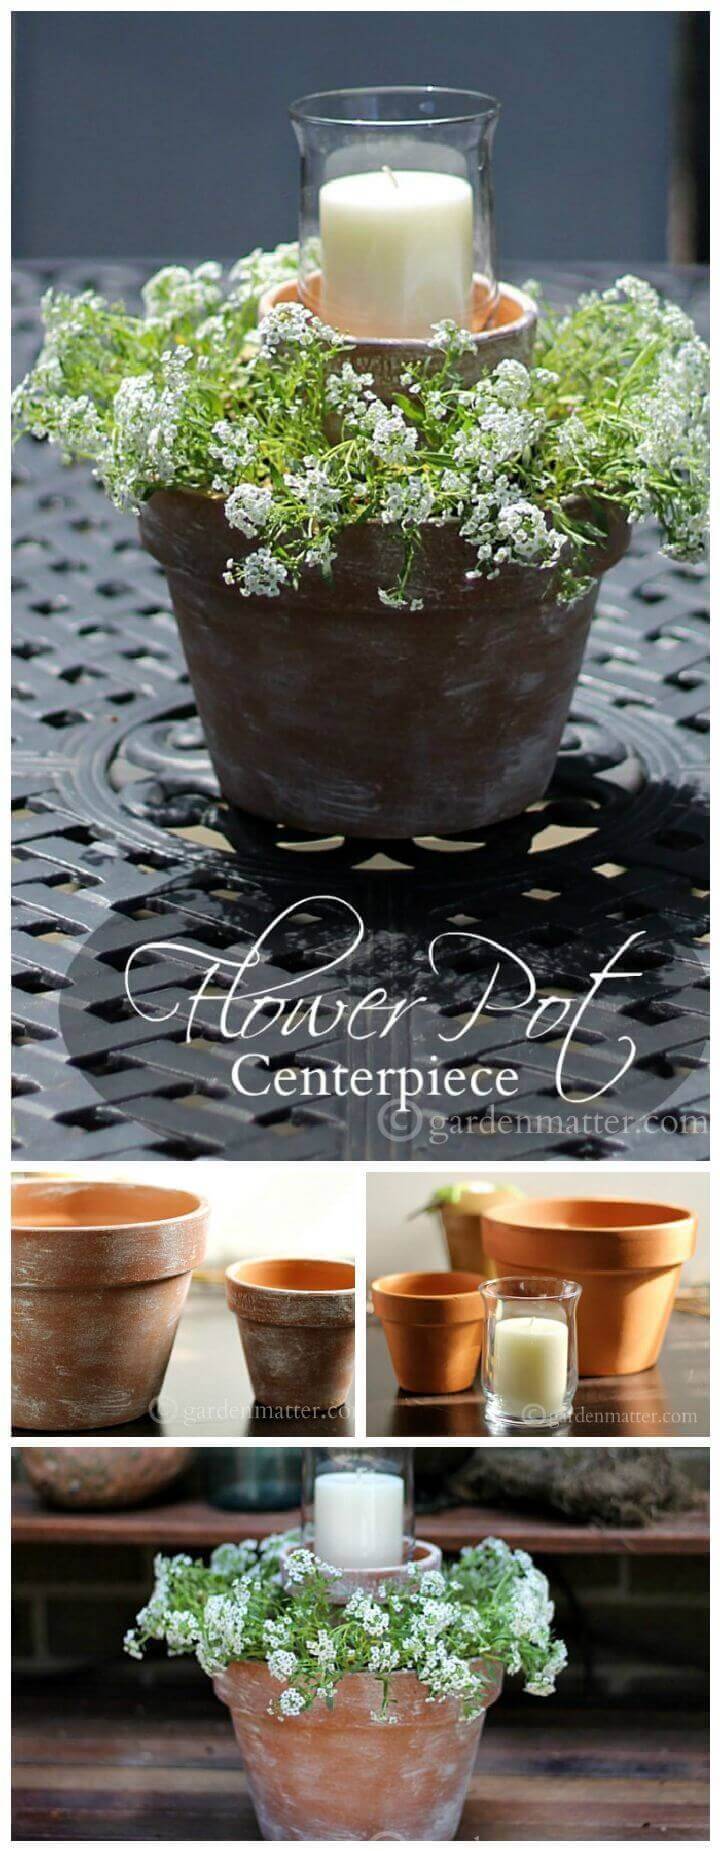 Candle And Flower Pot Centerpiece For Your Porch